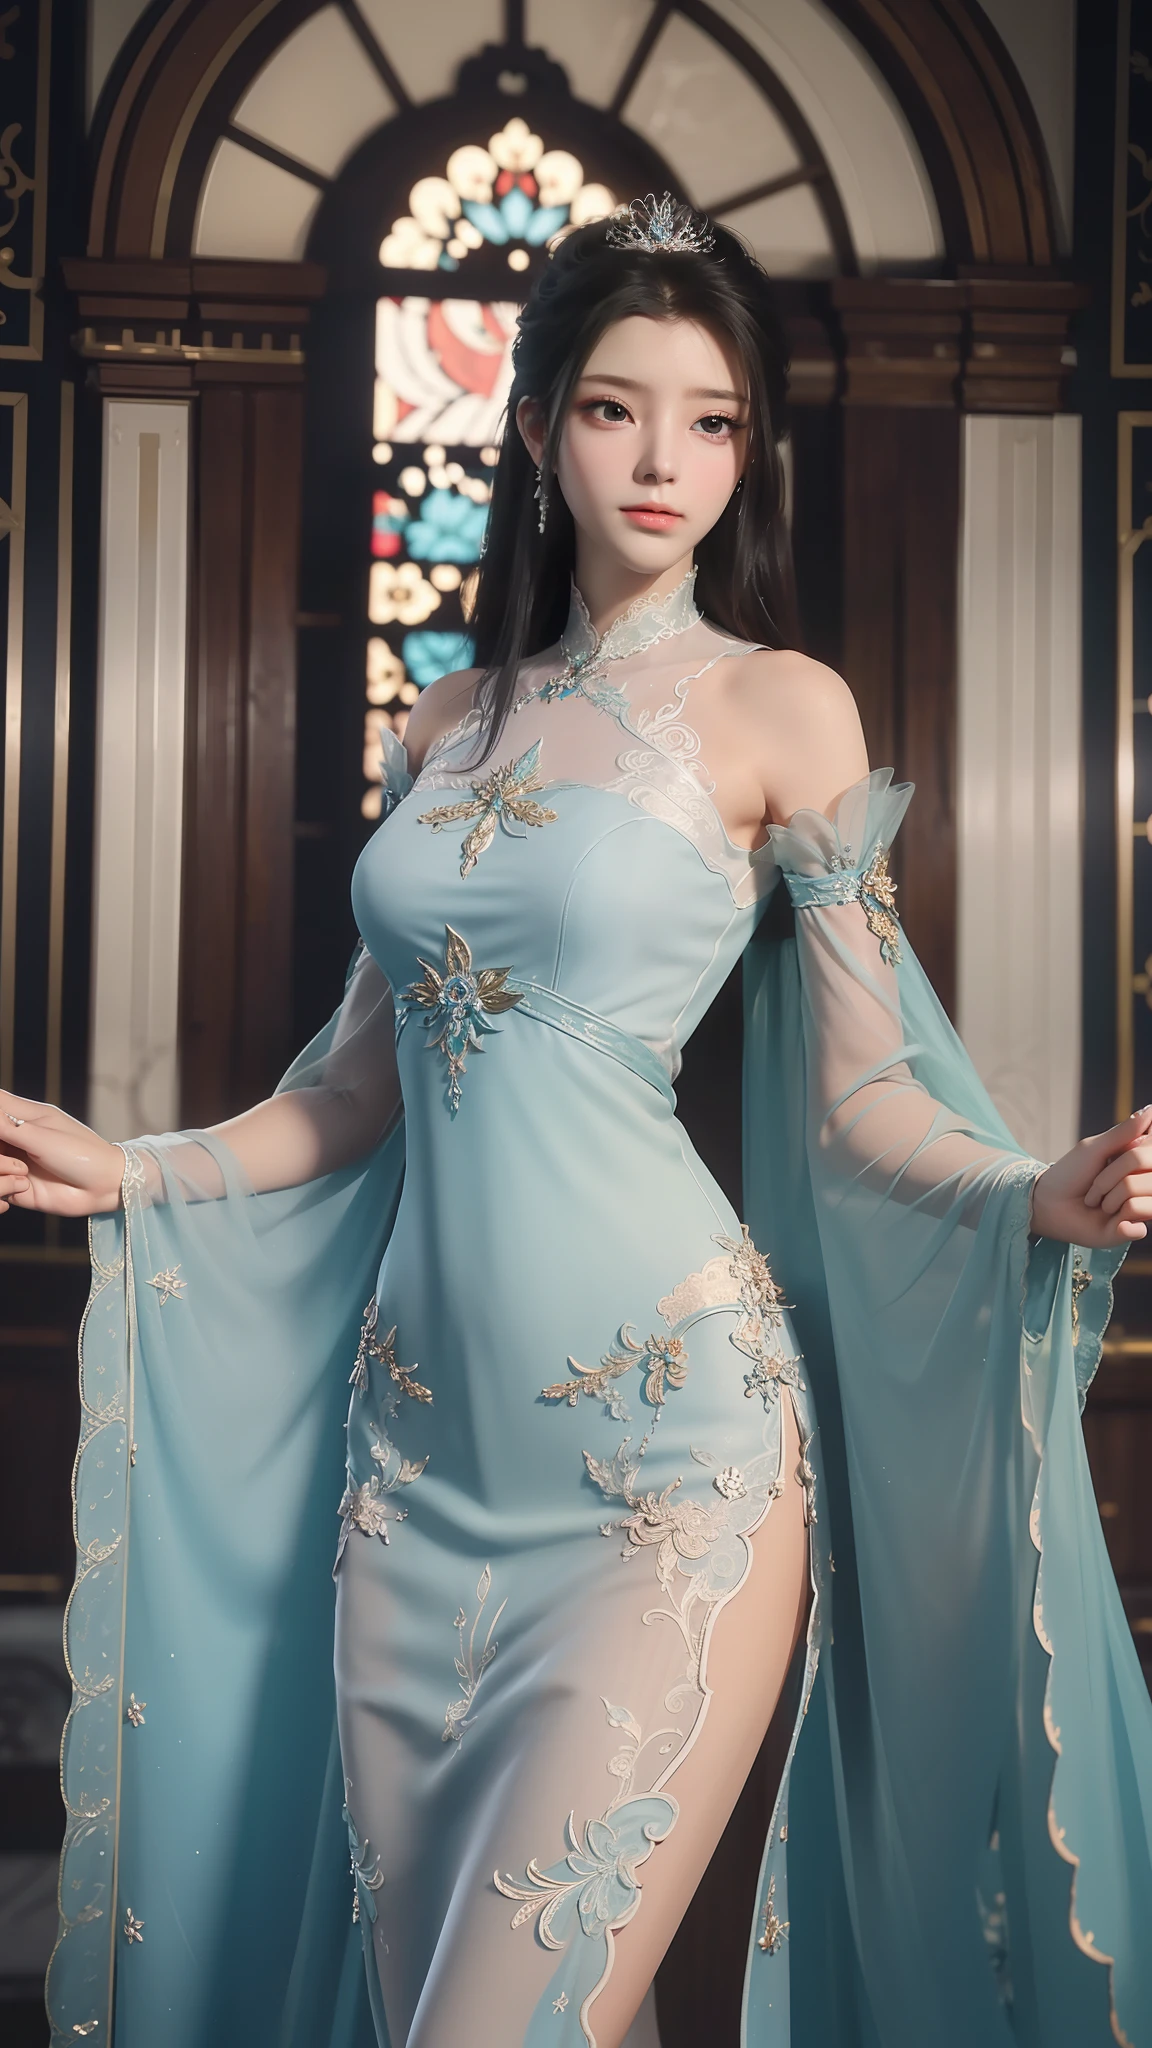 tmasterpiece，Best picture quality，HD 8K wallpaper，Beautiful picture，Elegant single woman，Round dress，Shiny eyes，Detail at its best，An exquisite masterpiece，Pure beauty and lightnesoderately aesthetic，Gentle and elegant，Attention to detail，Cyan white lace round princess dress，Immortal